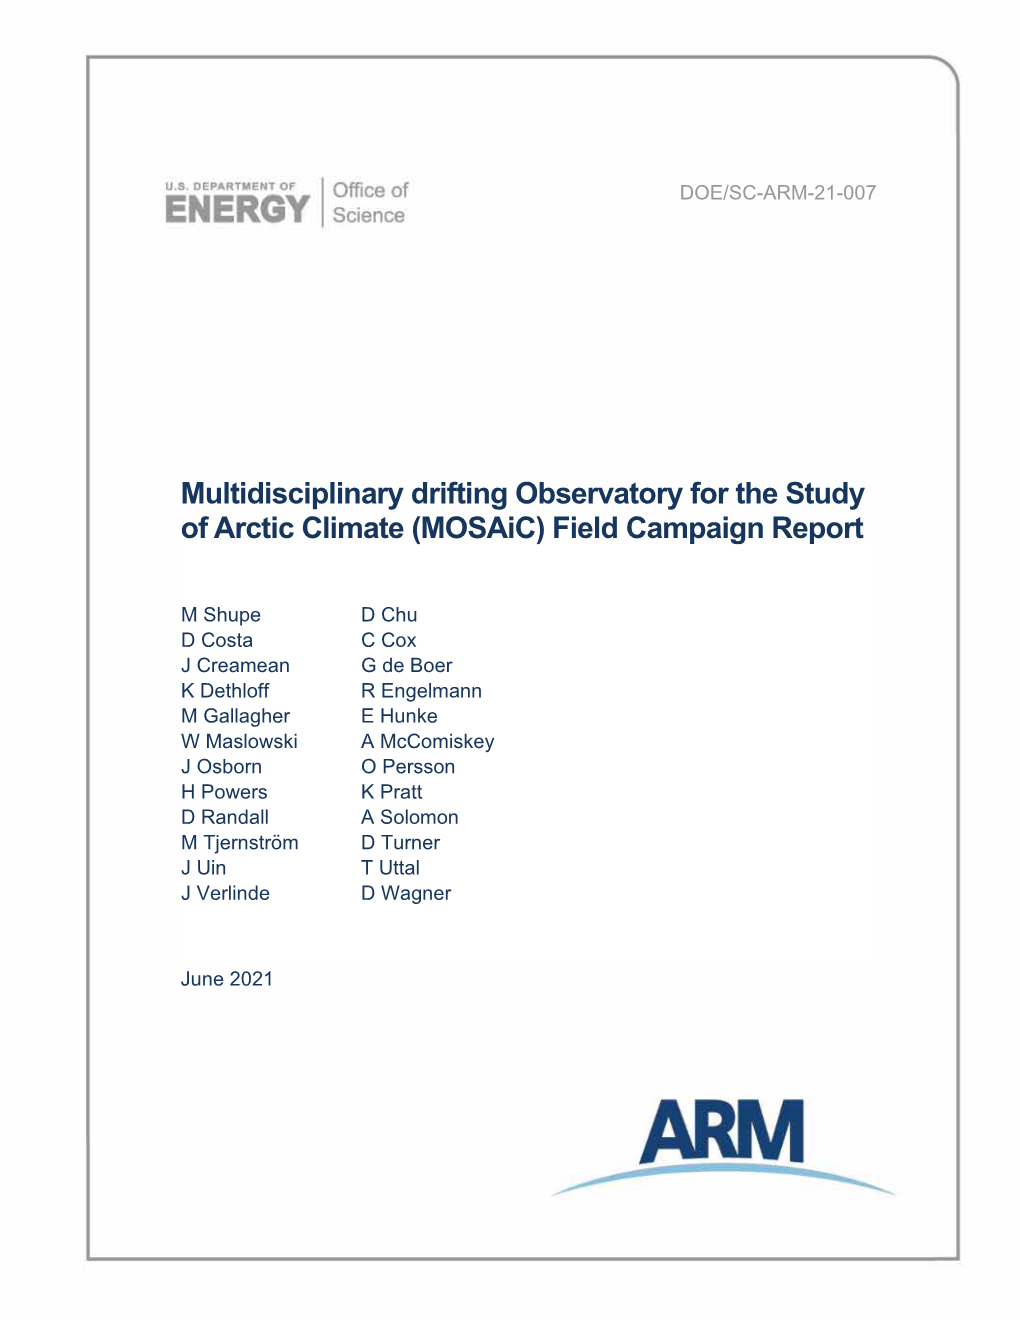 Multidisciplinary Drifting Observatory for the Study of Arctic Climate (Mosaic) Field Campaign Report